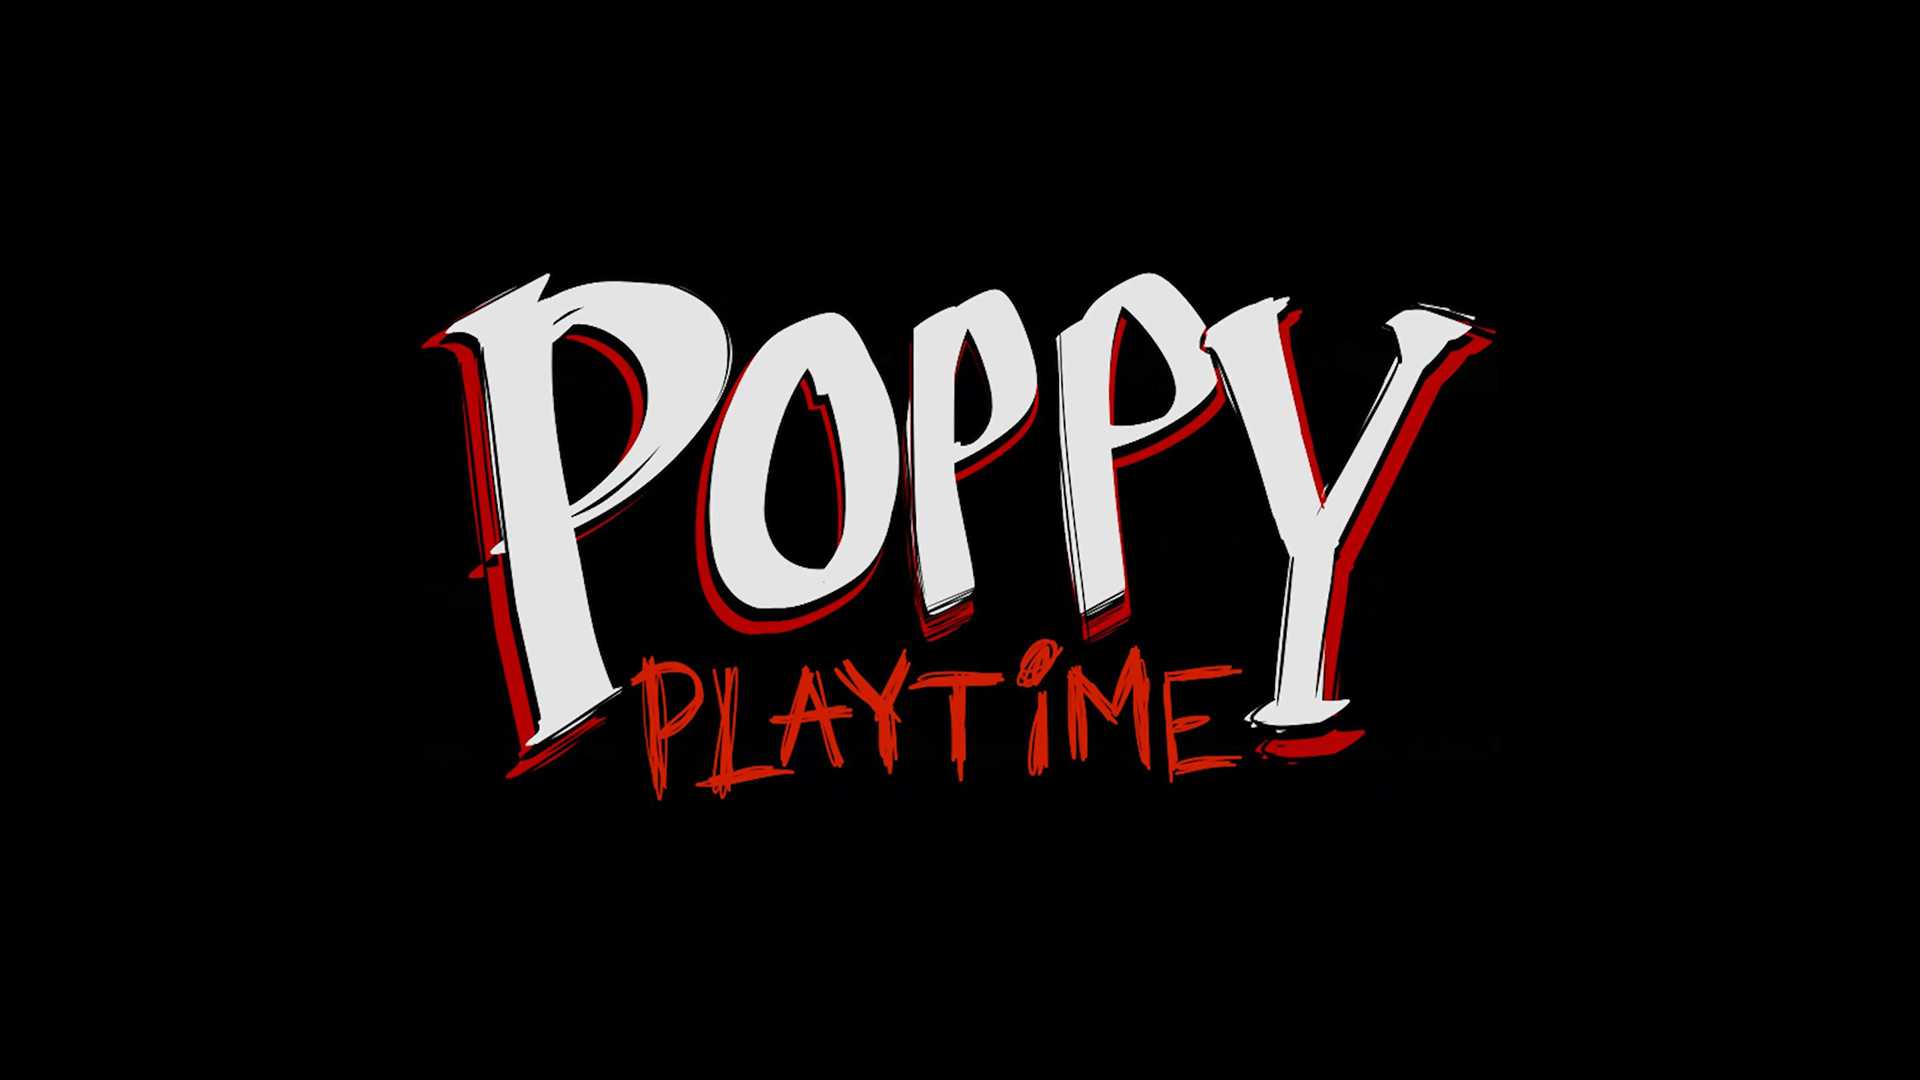 Poppy Playtime Wallpapers - iXpap